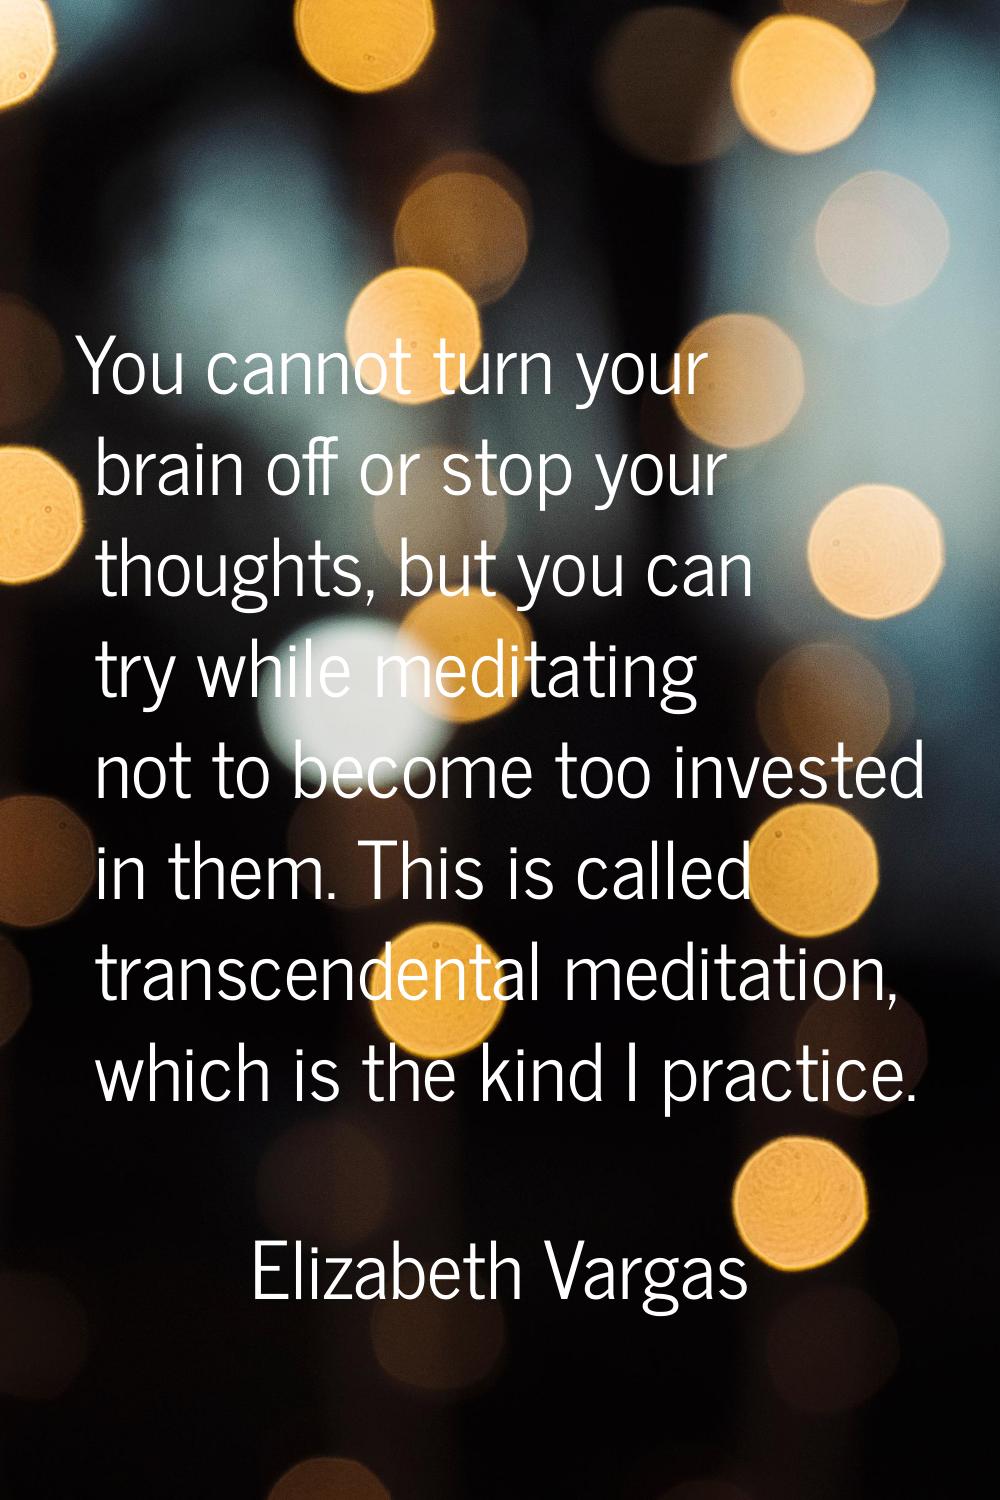 You cannot turn your brain off or stop your thoughts, but you can try while meditating not to becom